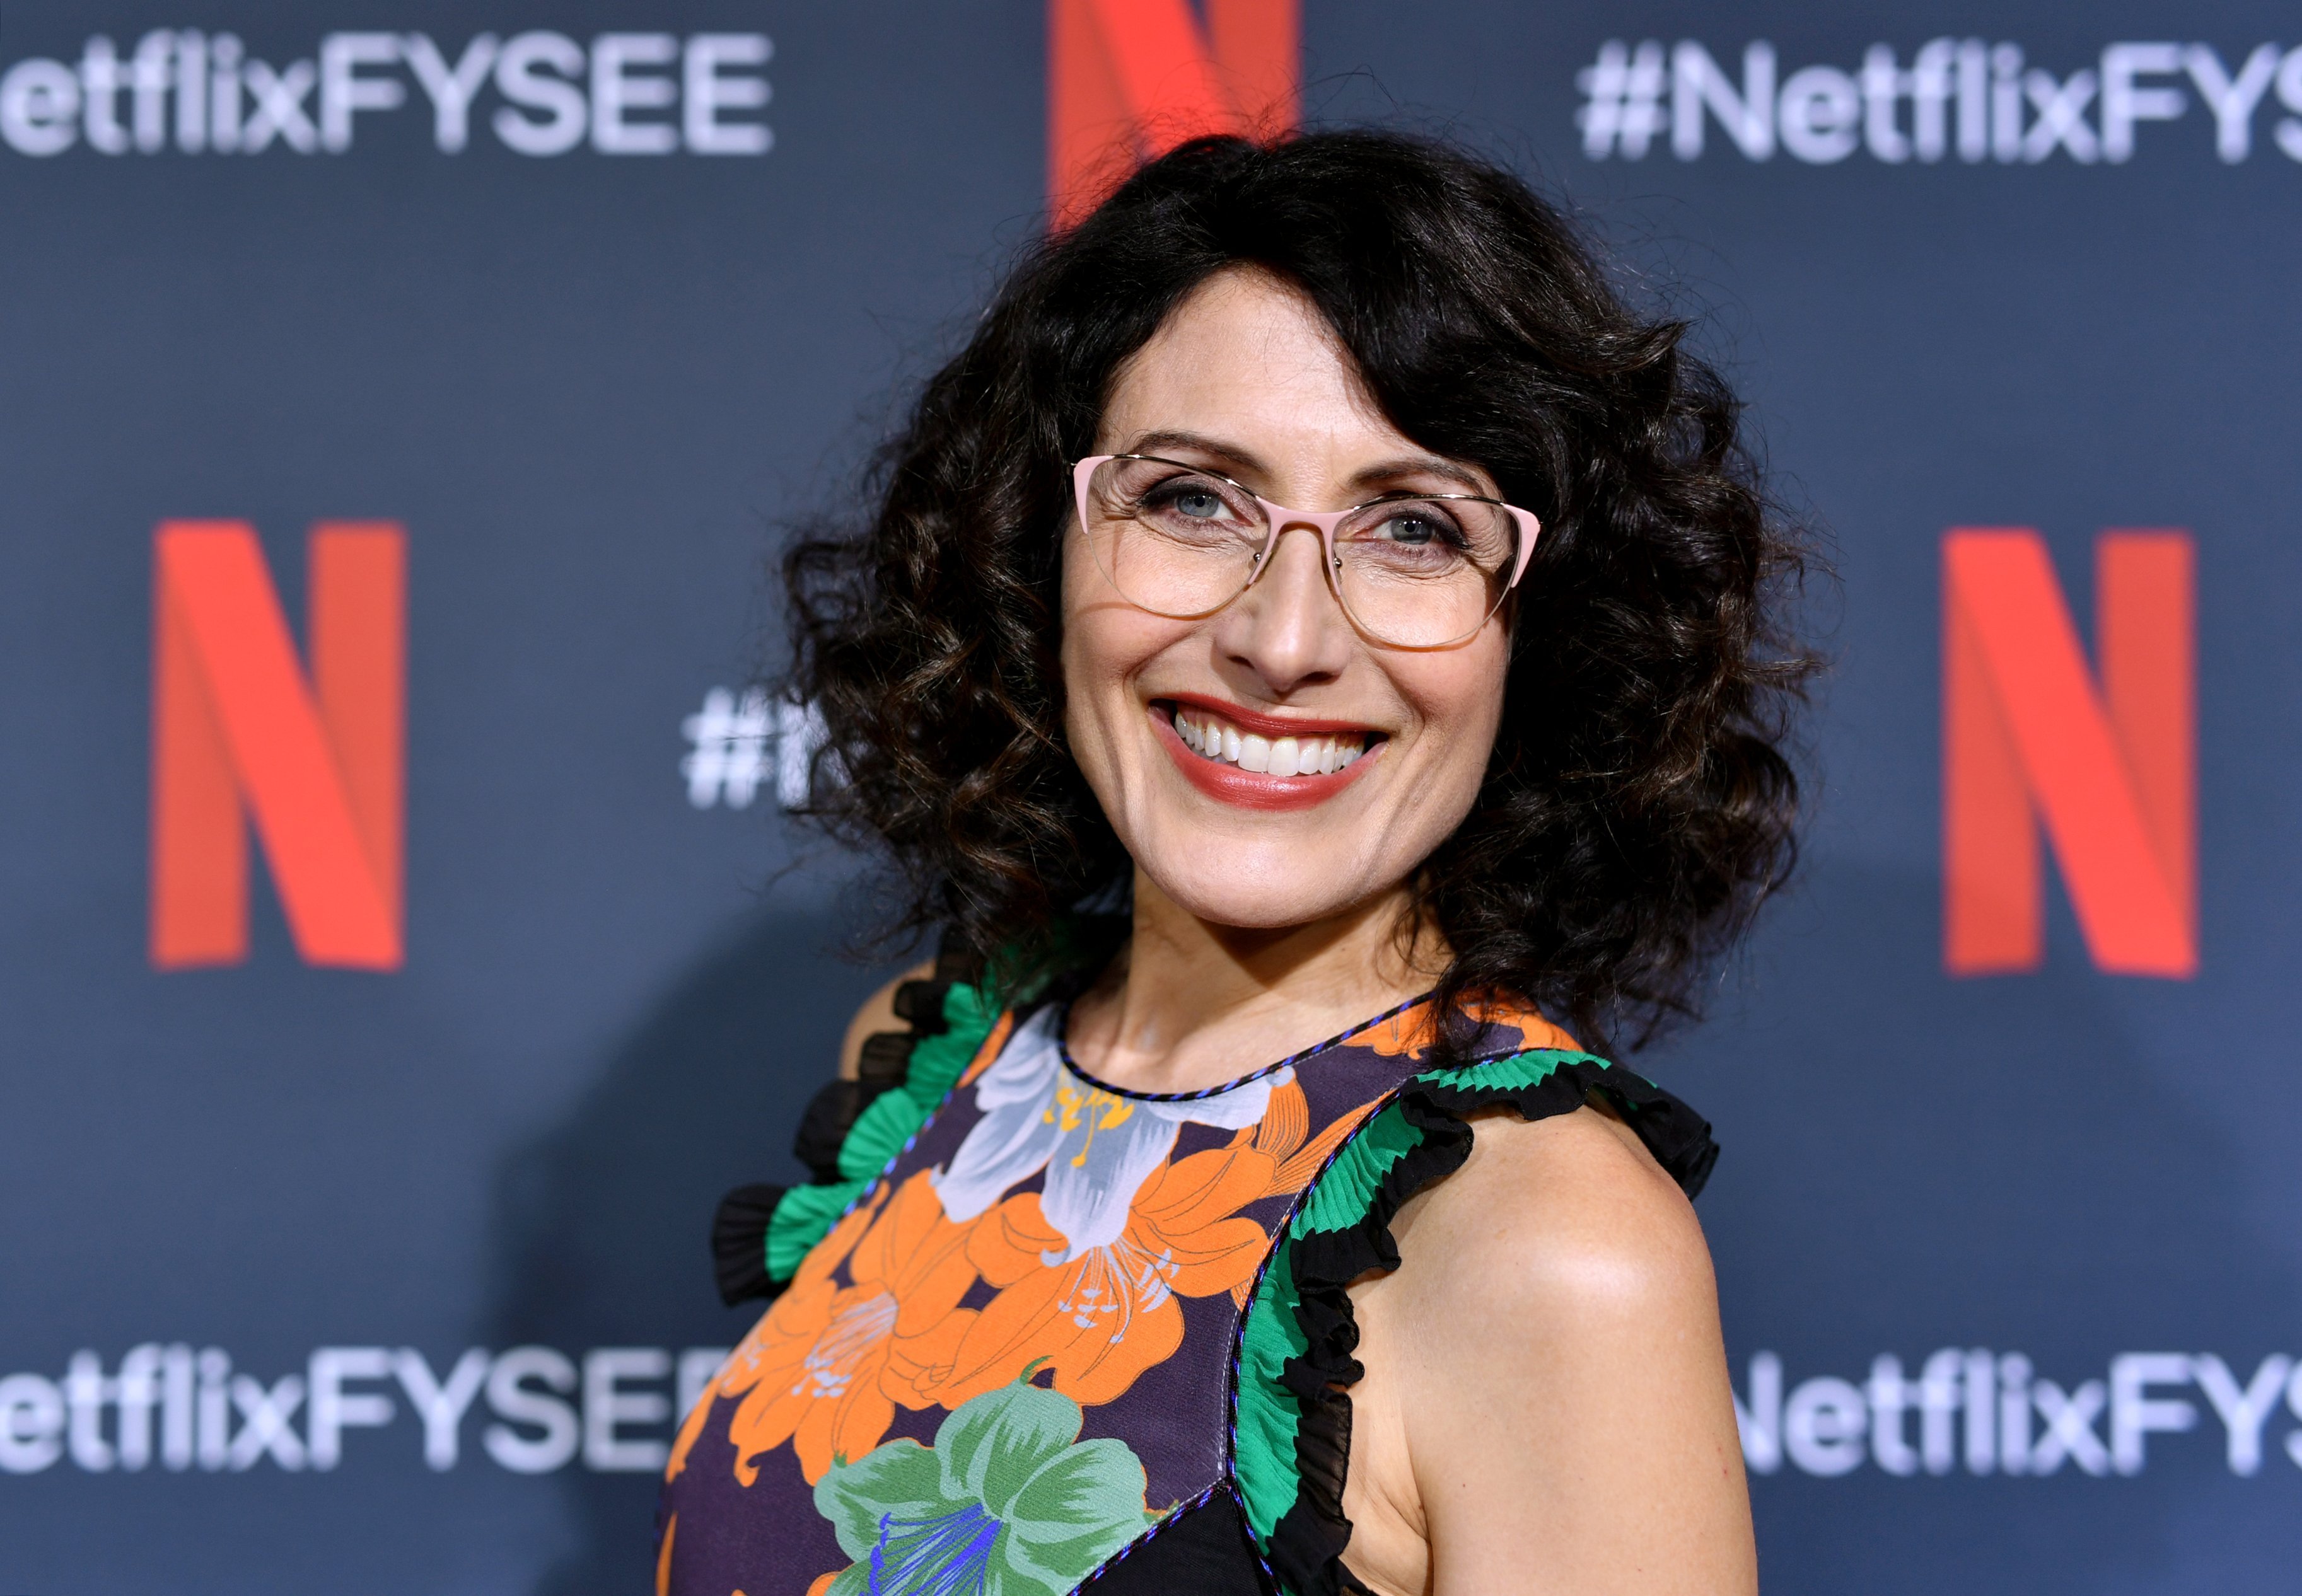 Lisa Edelstein attends the Netflix FYSEE Scene Stealer Panel at Raleigh Studios on May 30, 2019 | Source: Getty Images